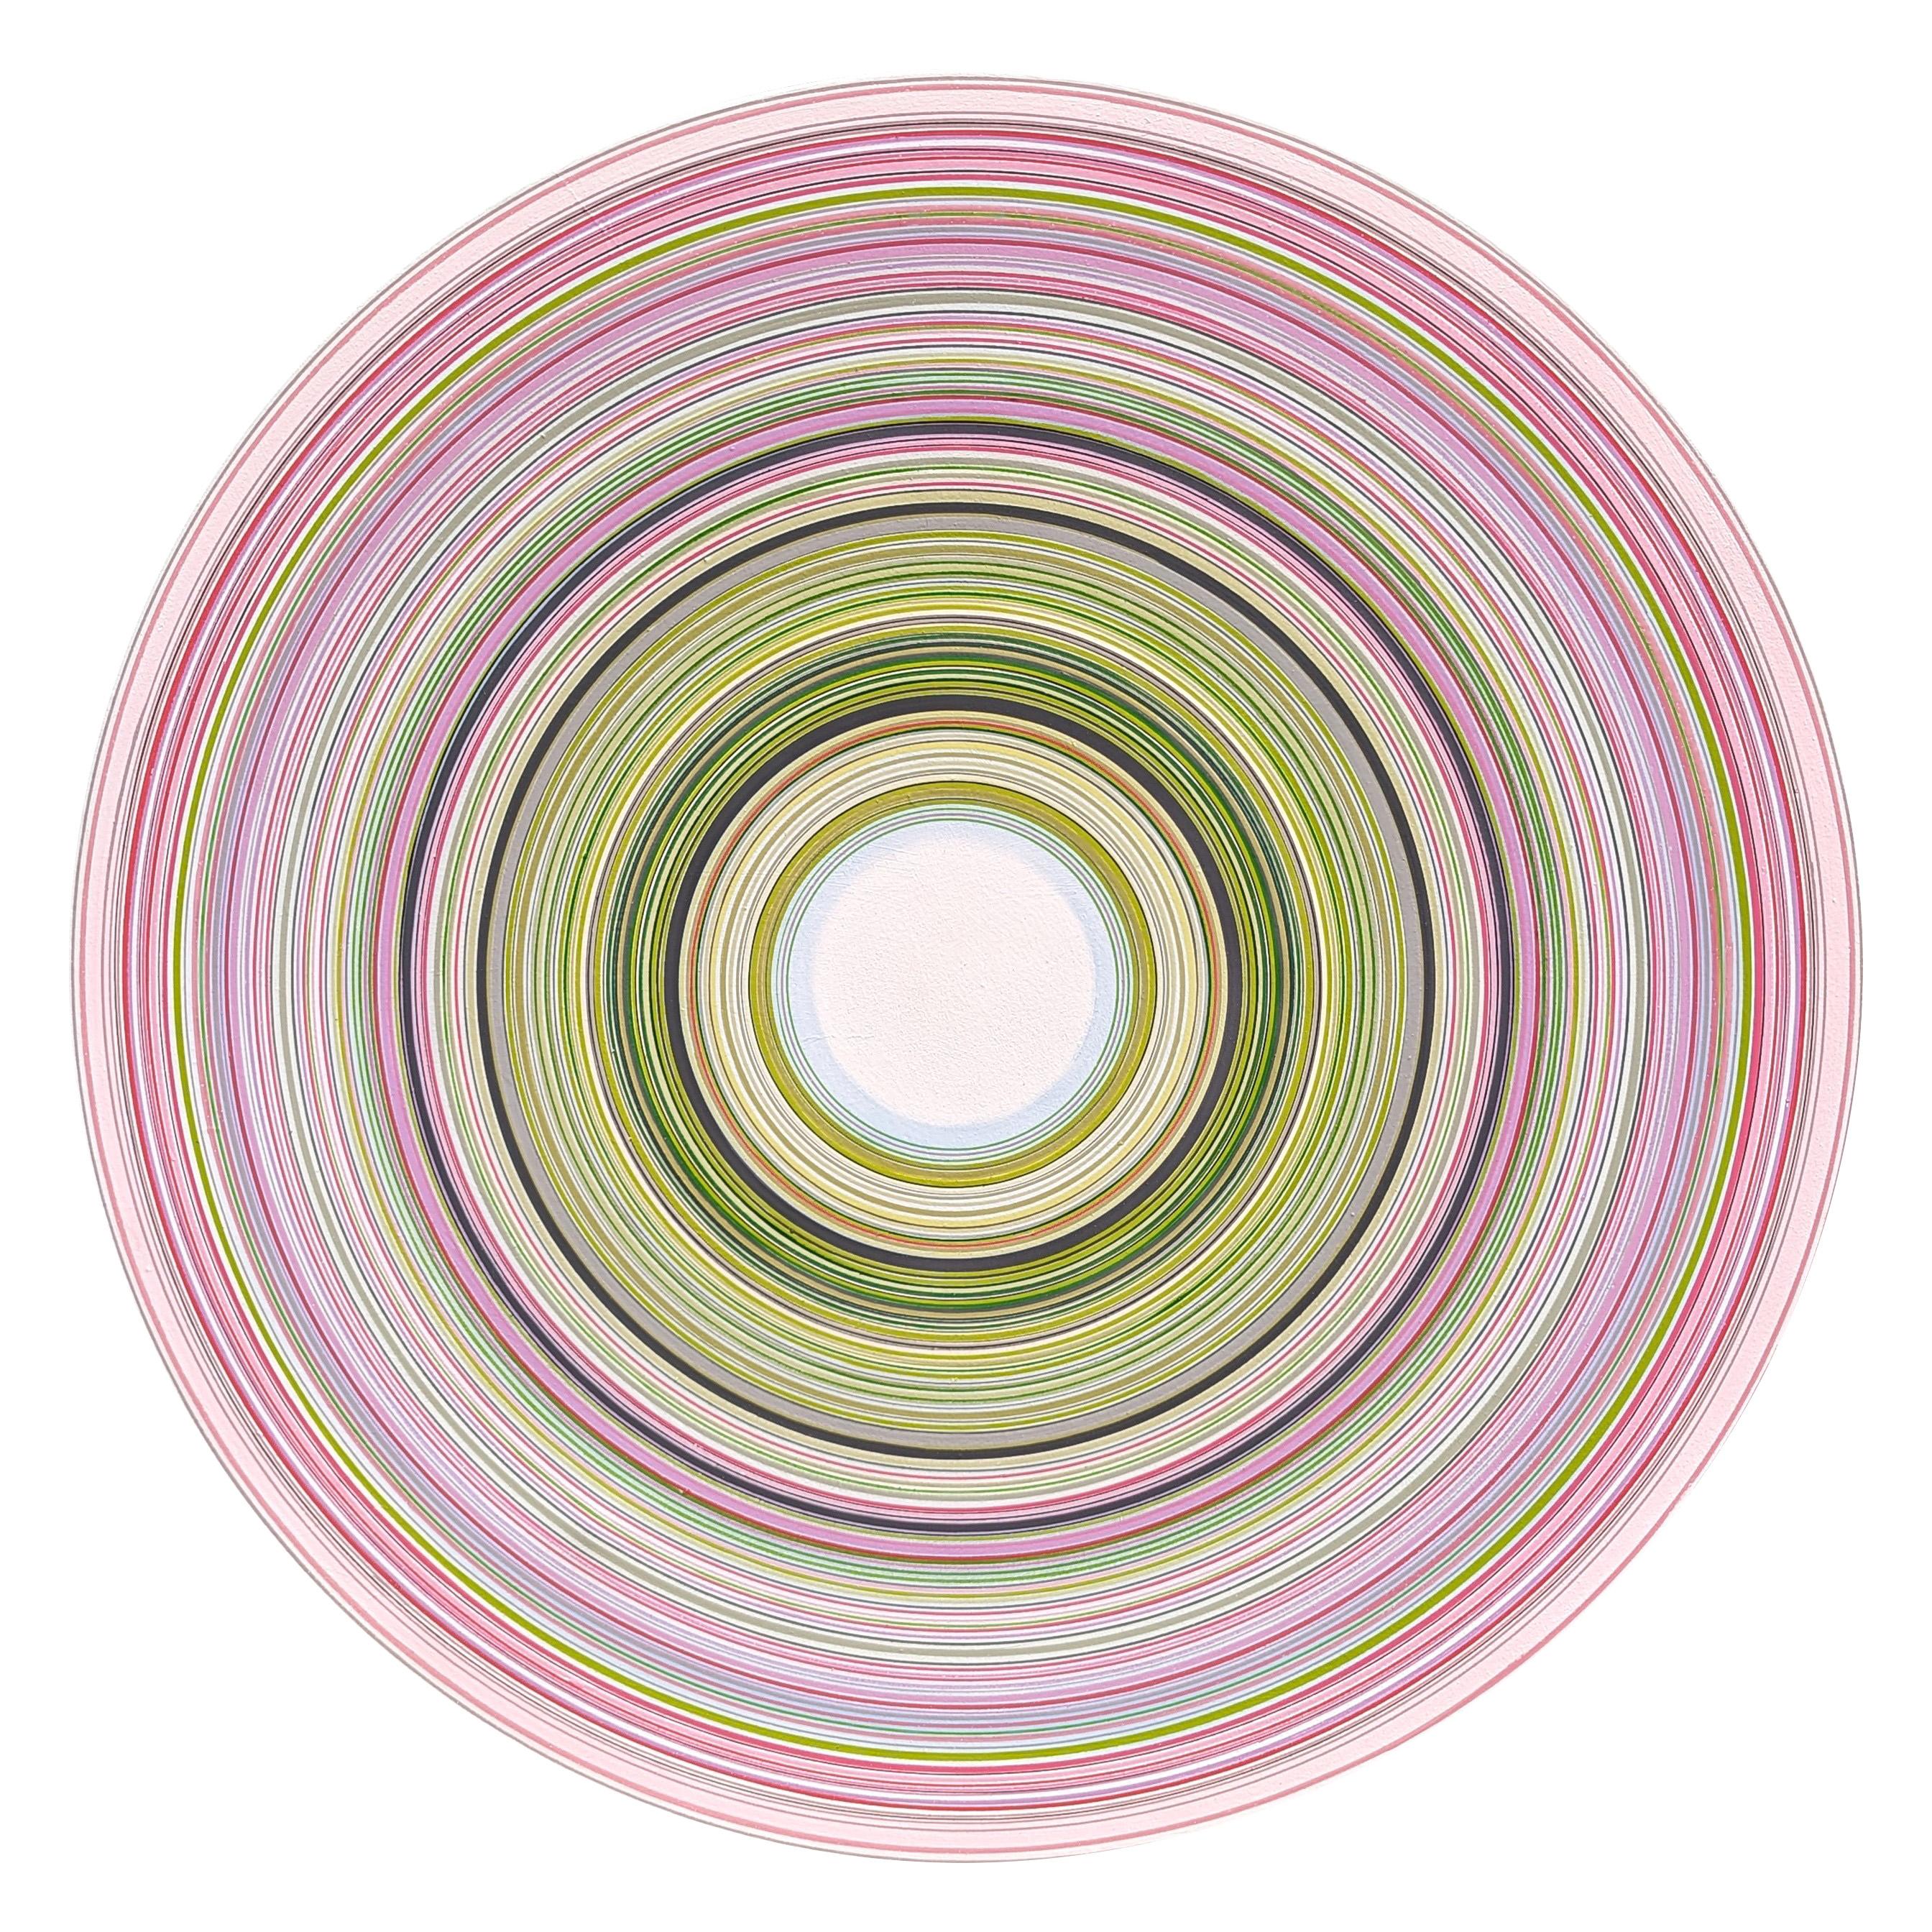 "Cloud Suite" Contemporary Abstract Pink and Green Concentric Circle Painting - Mixed Media Art by David Hardaker